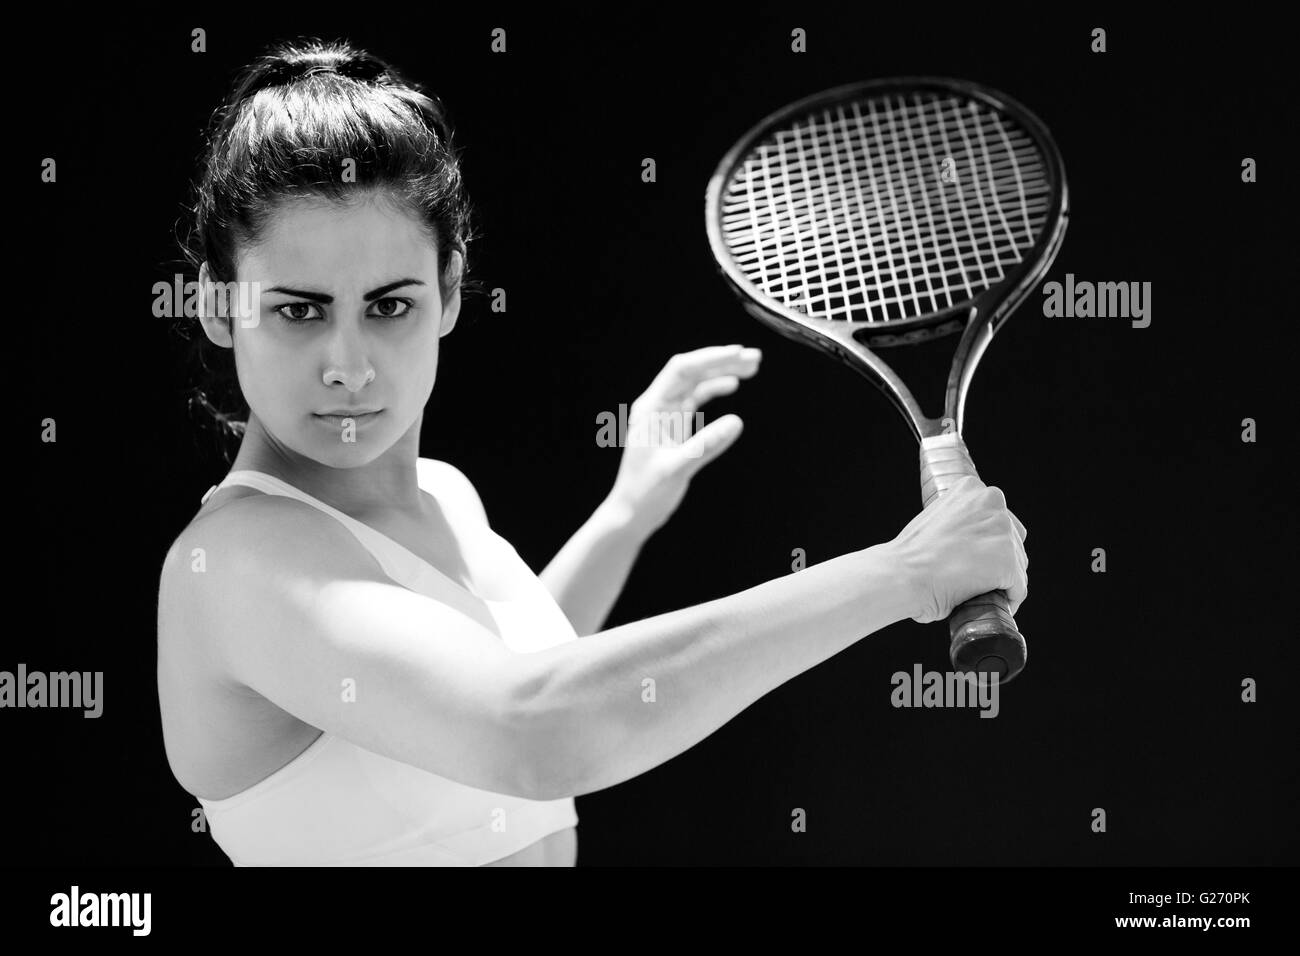 Portrait of confident female tennis player with racquet Stock Photo